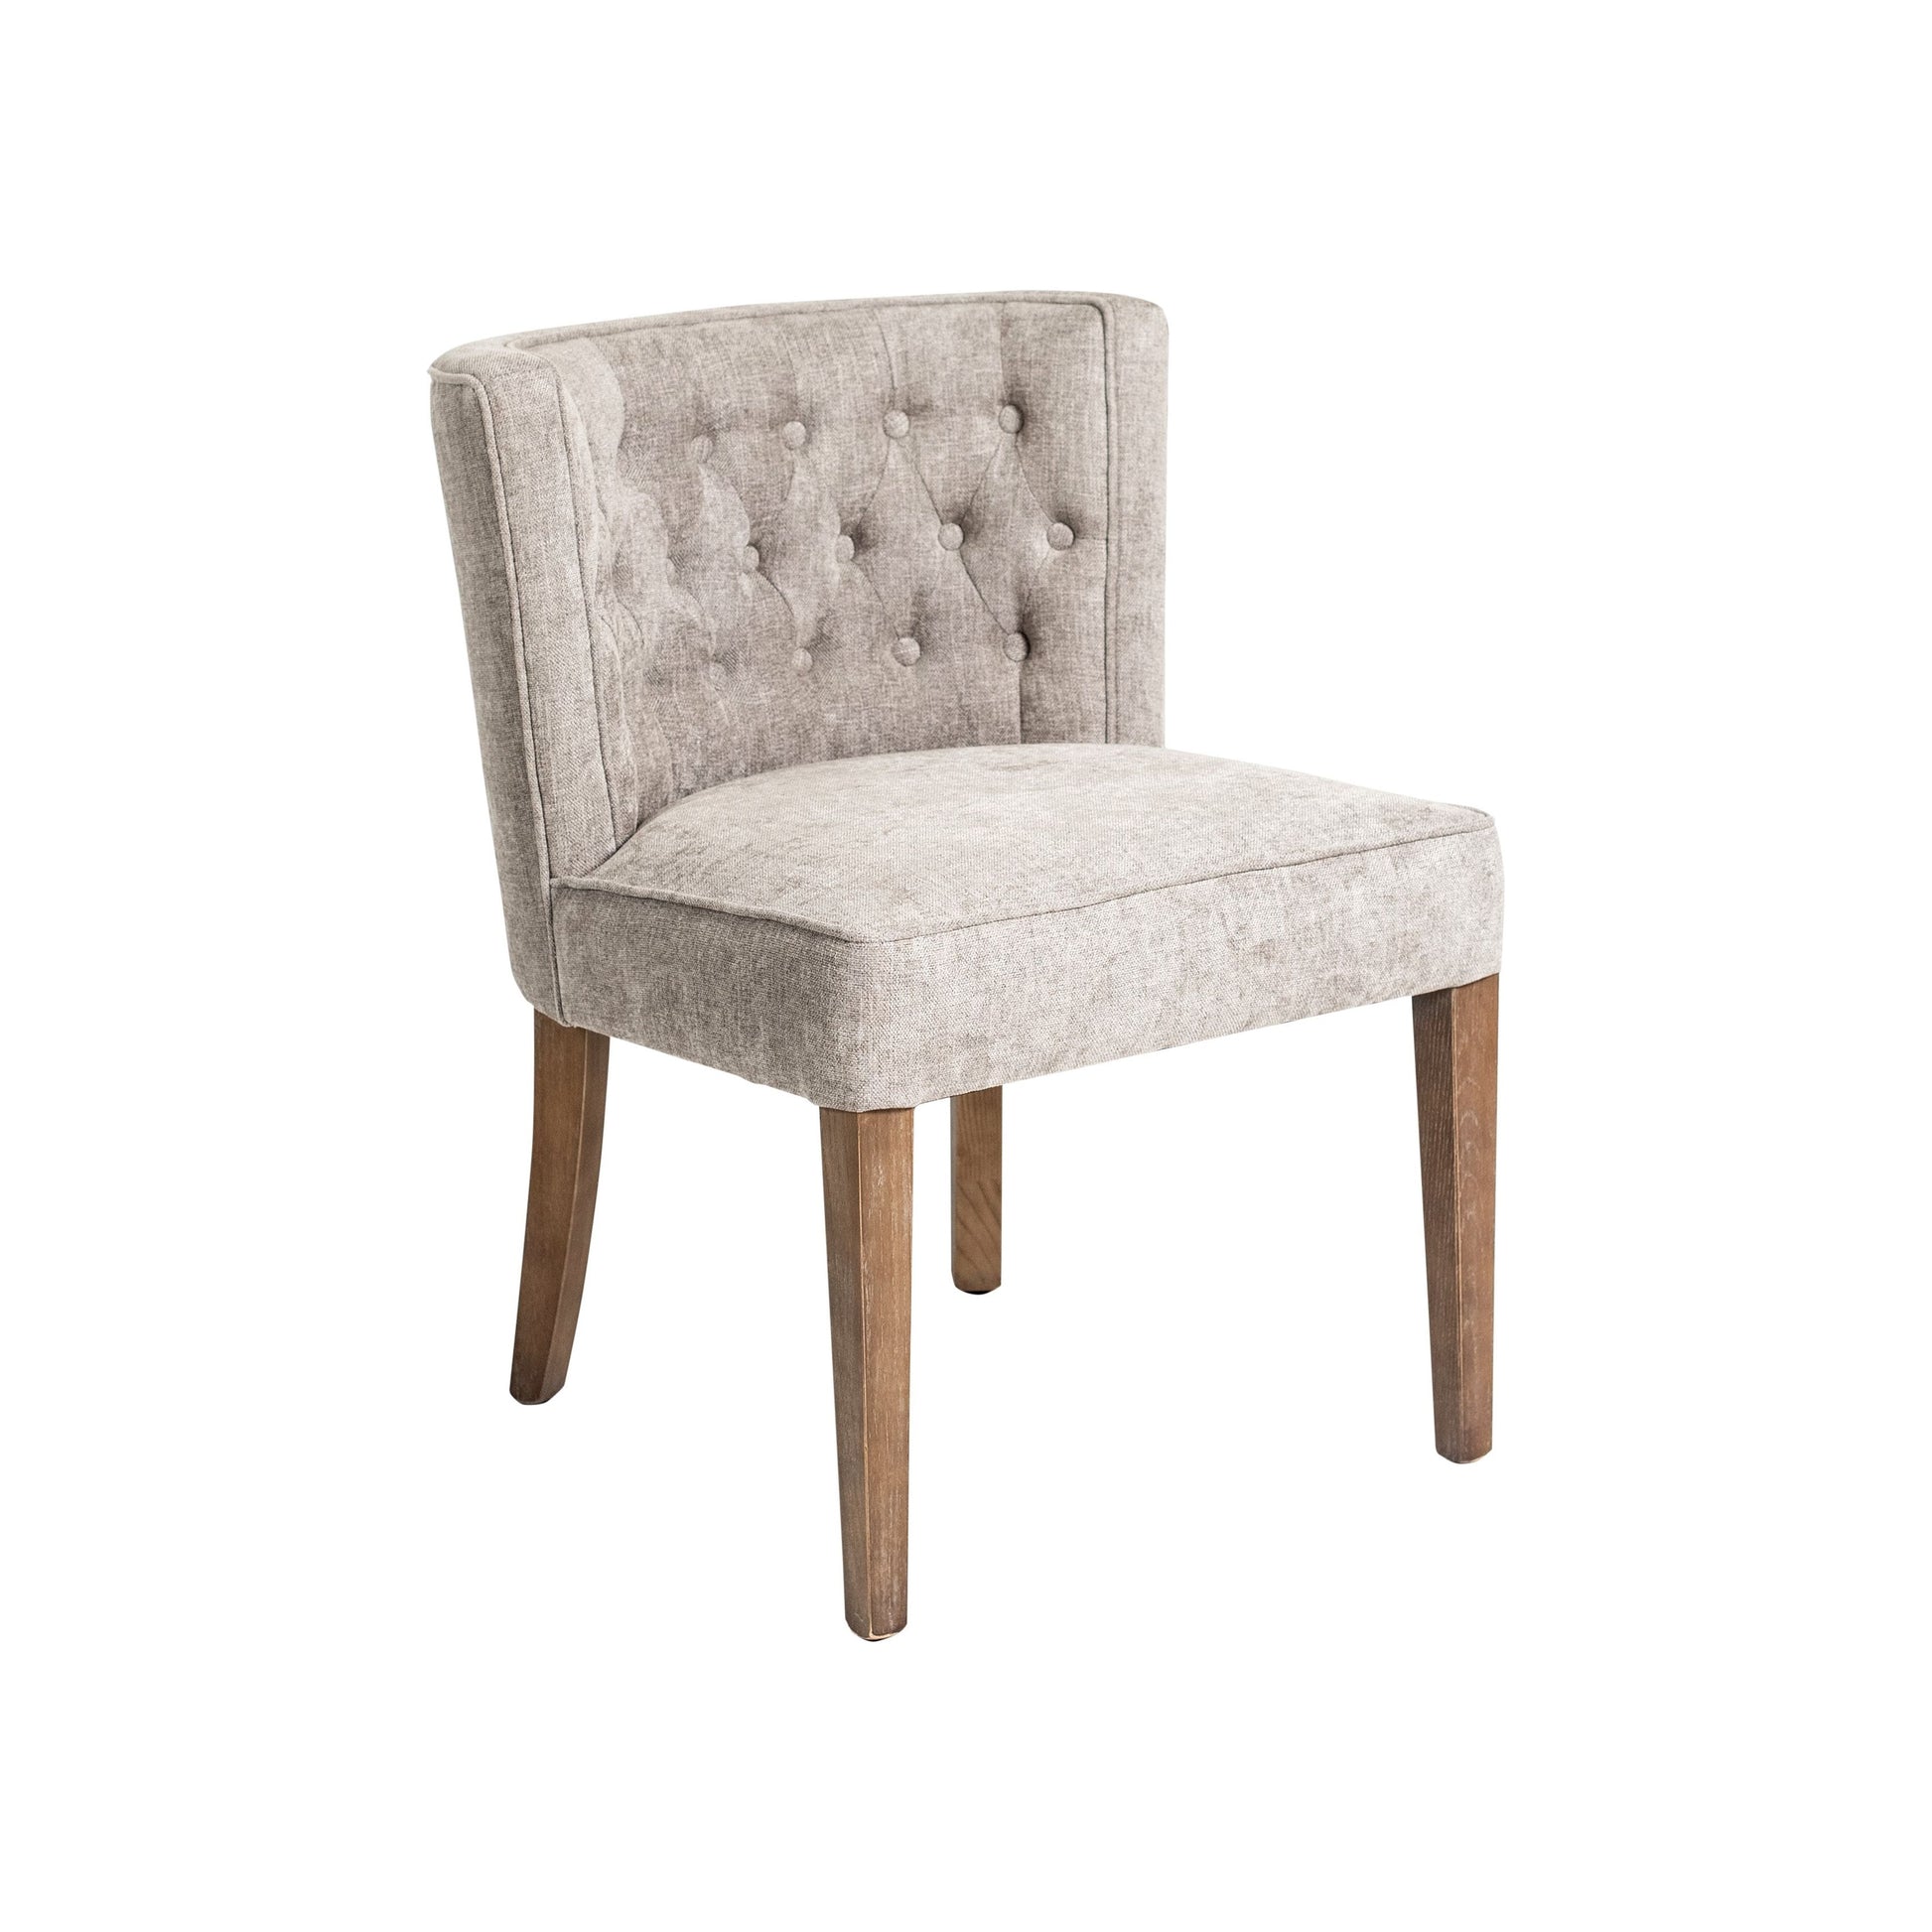 An elegant Alpha Dining Chair with a textured light gray fabric upholstery and sturdy wooden legs, isolated on a white background. The chair features a curved backrest and minimalist design embodying modern elegance.